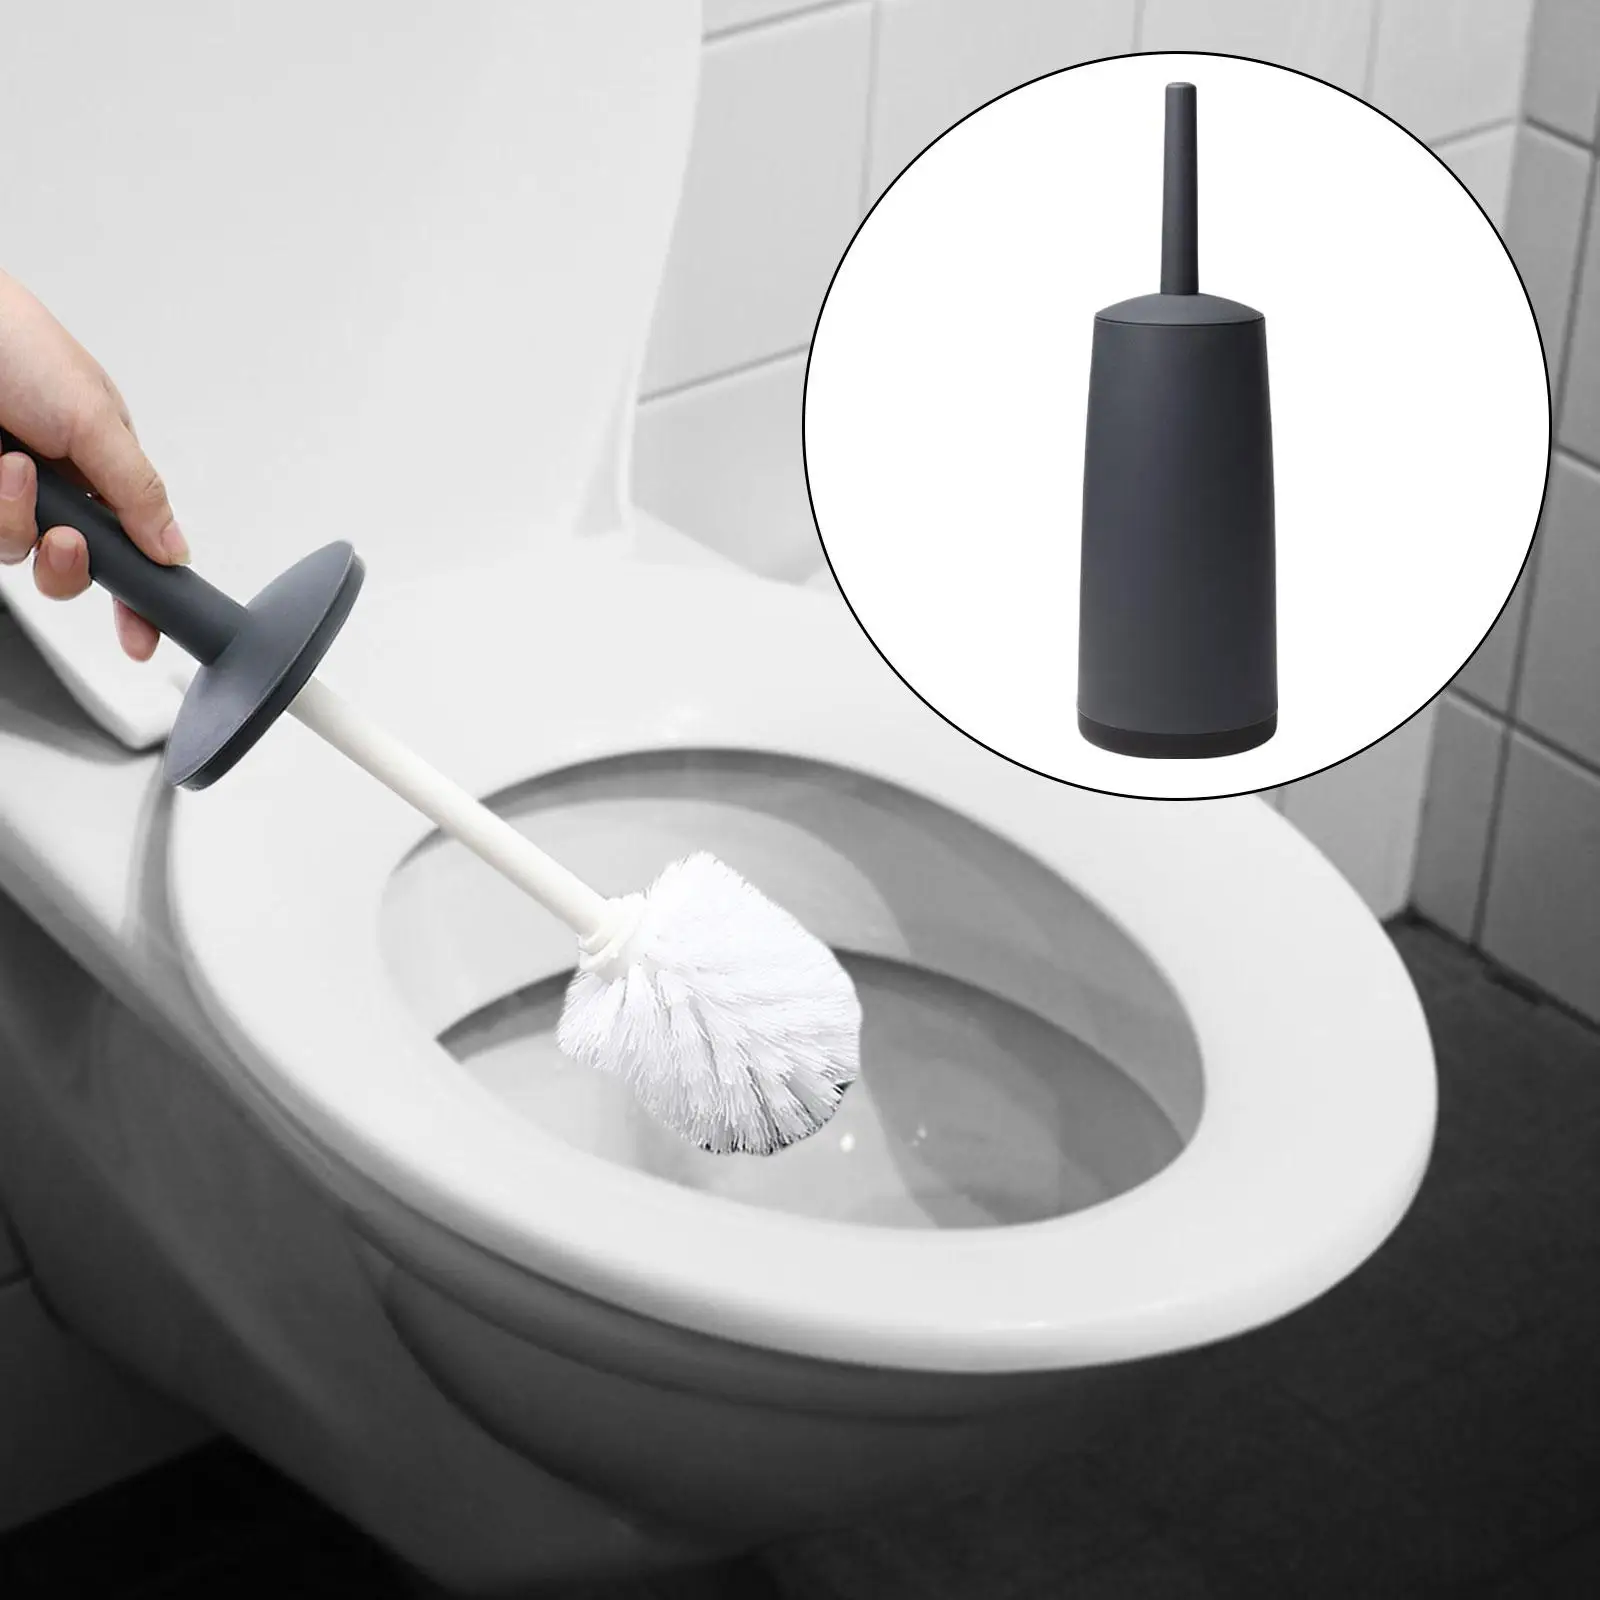 Toilet Bowl Brush and Holder Ergonomic Handle Storage Caddy Anti Drip Deep Cleaning Cleaning Supplies Toilet Cleaning Brush Set